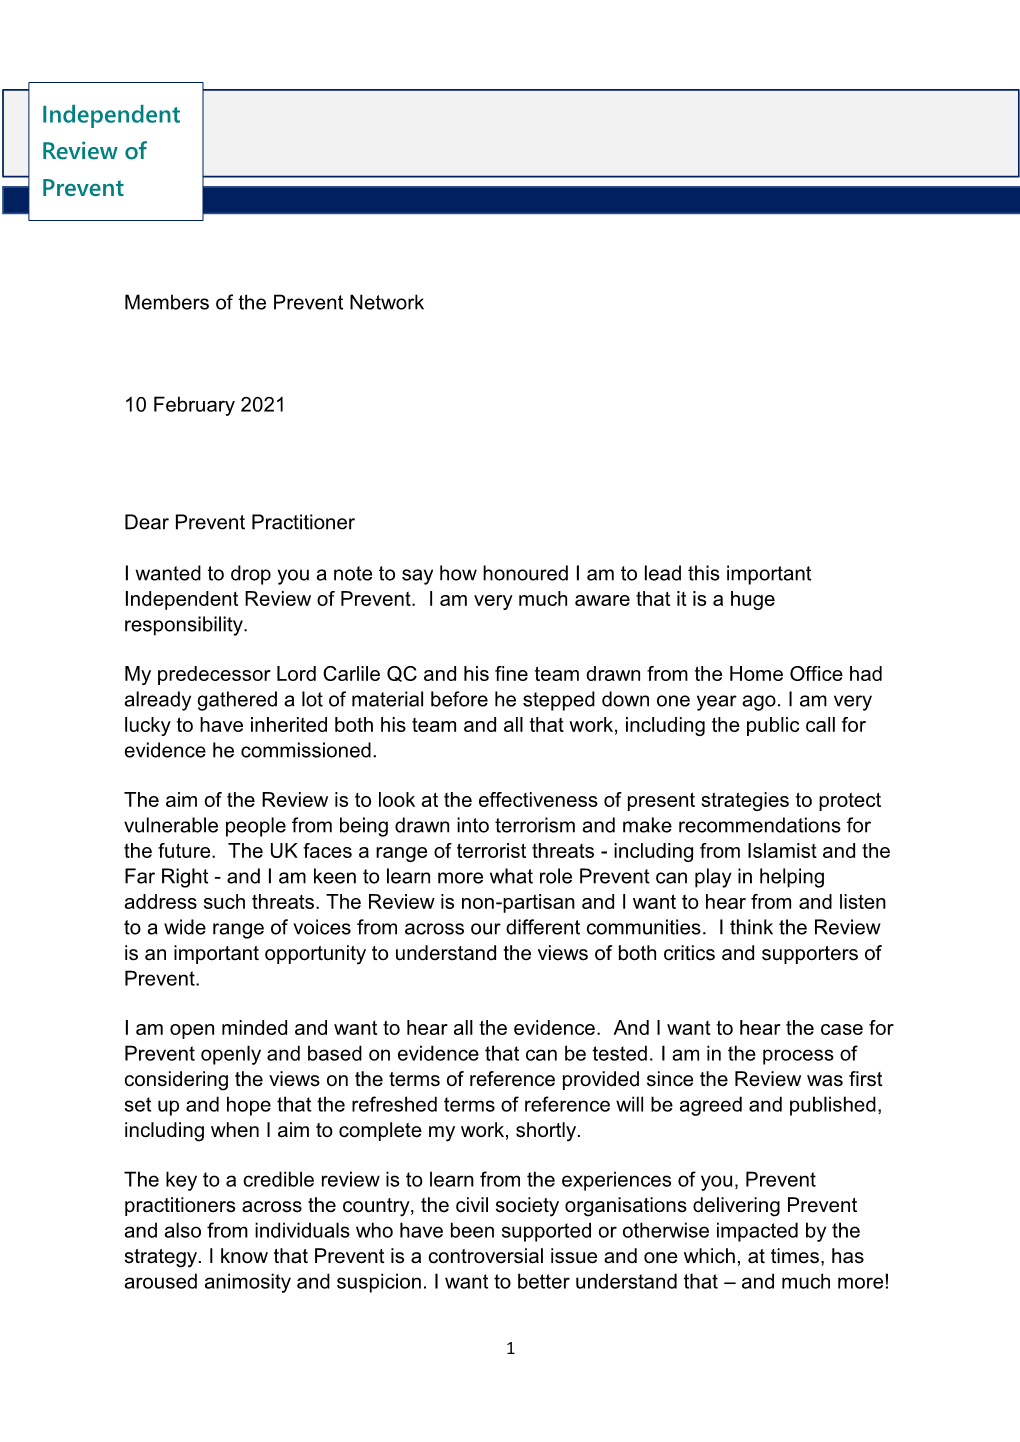 Letter from William Shawcross to the Prevent Network